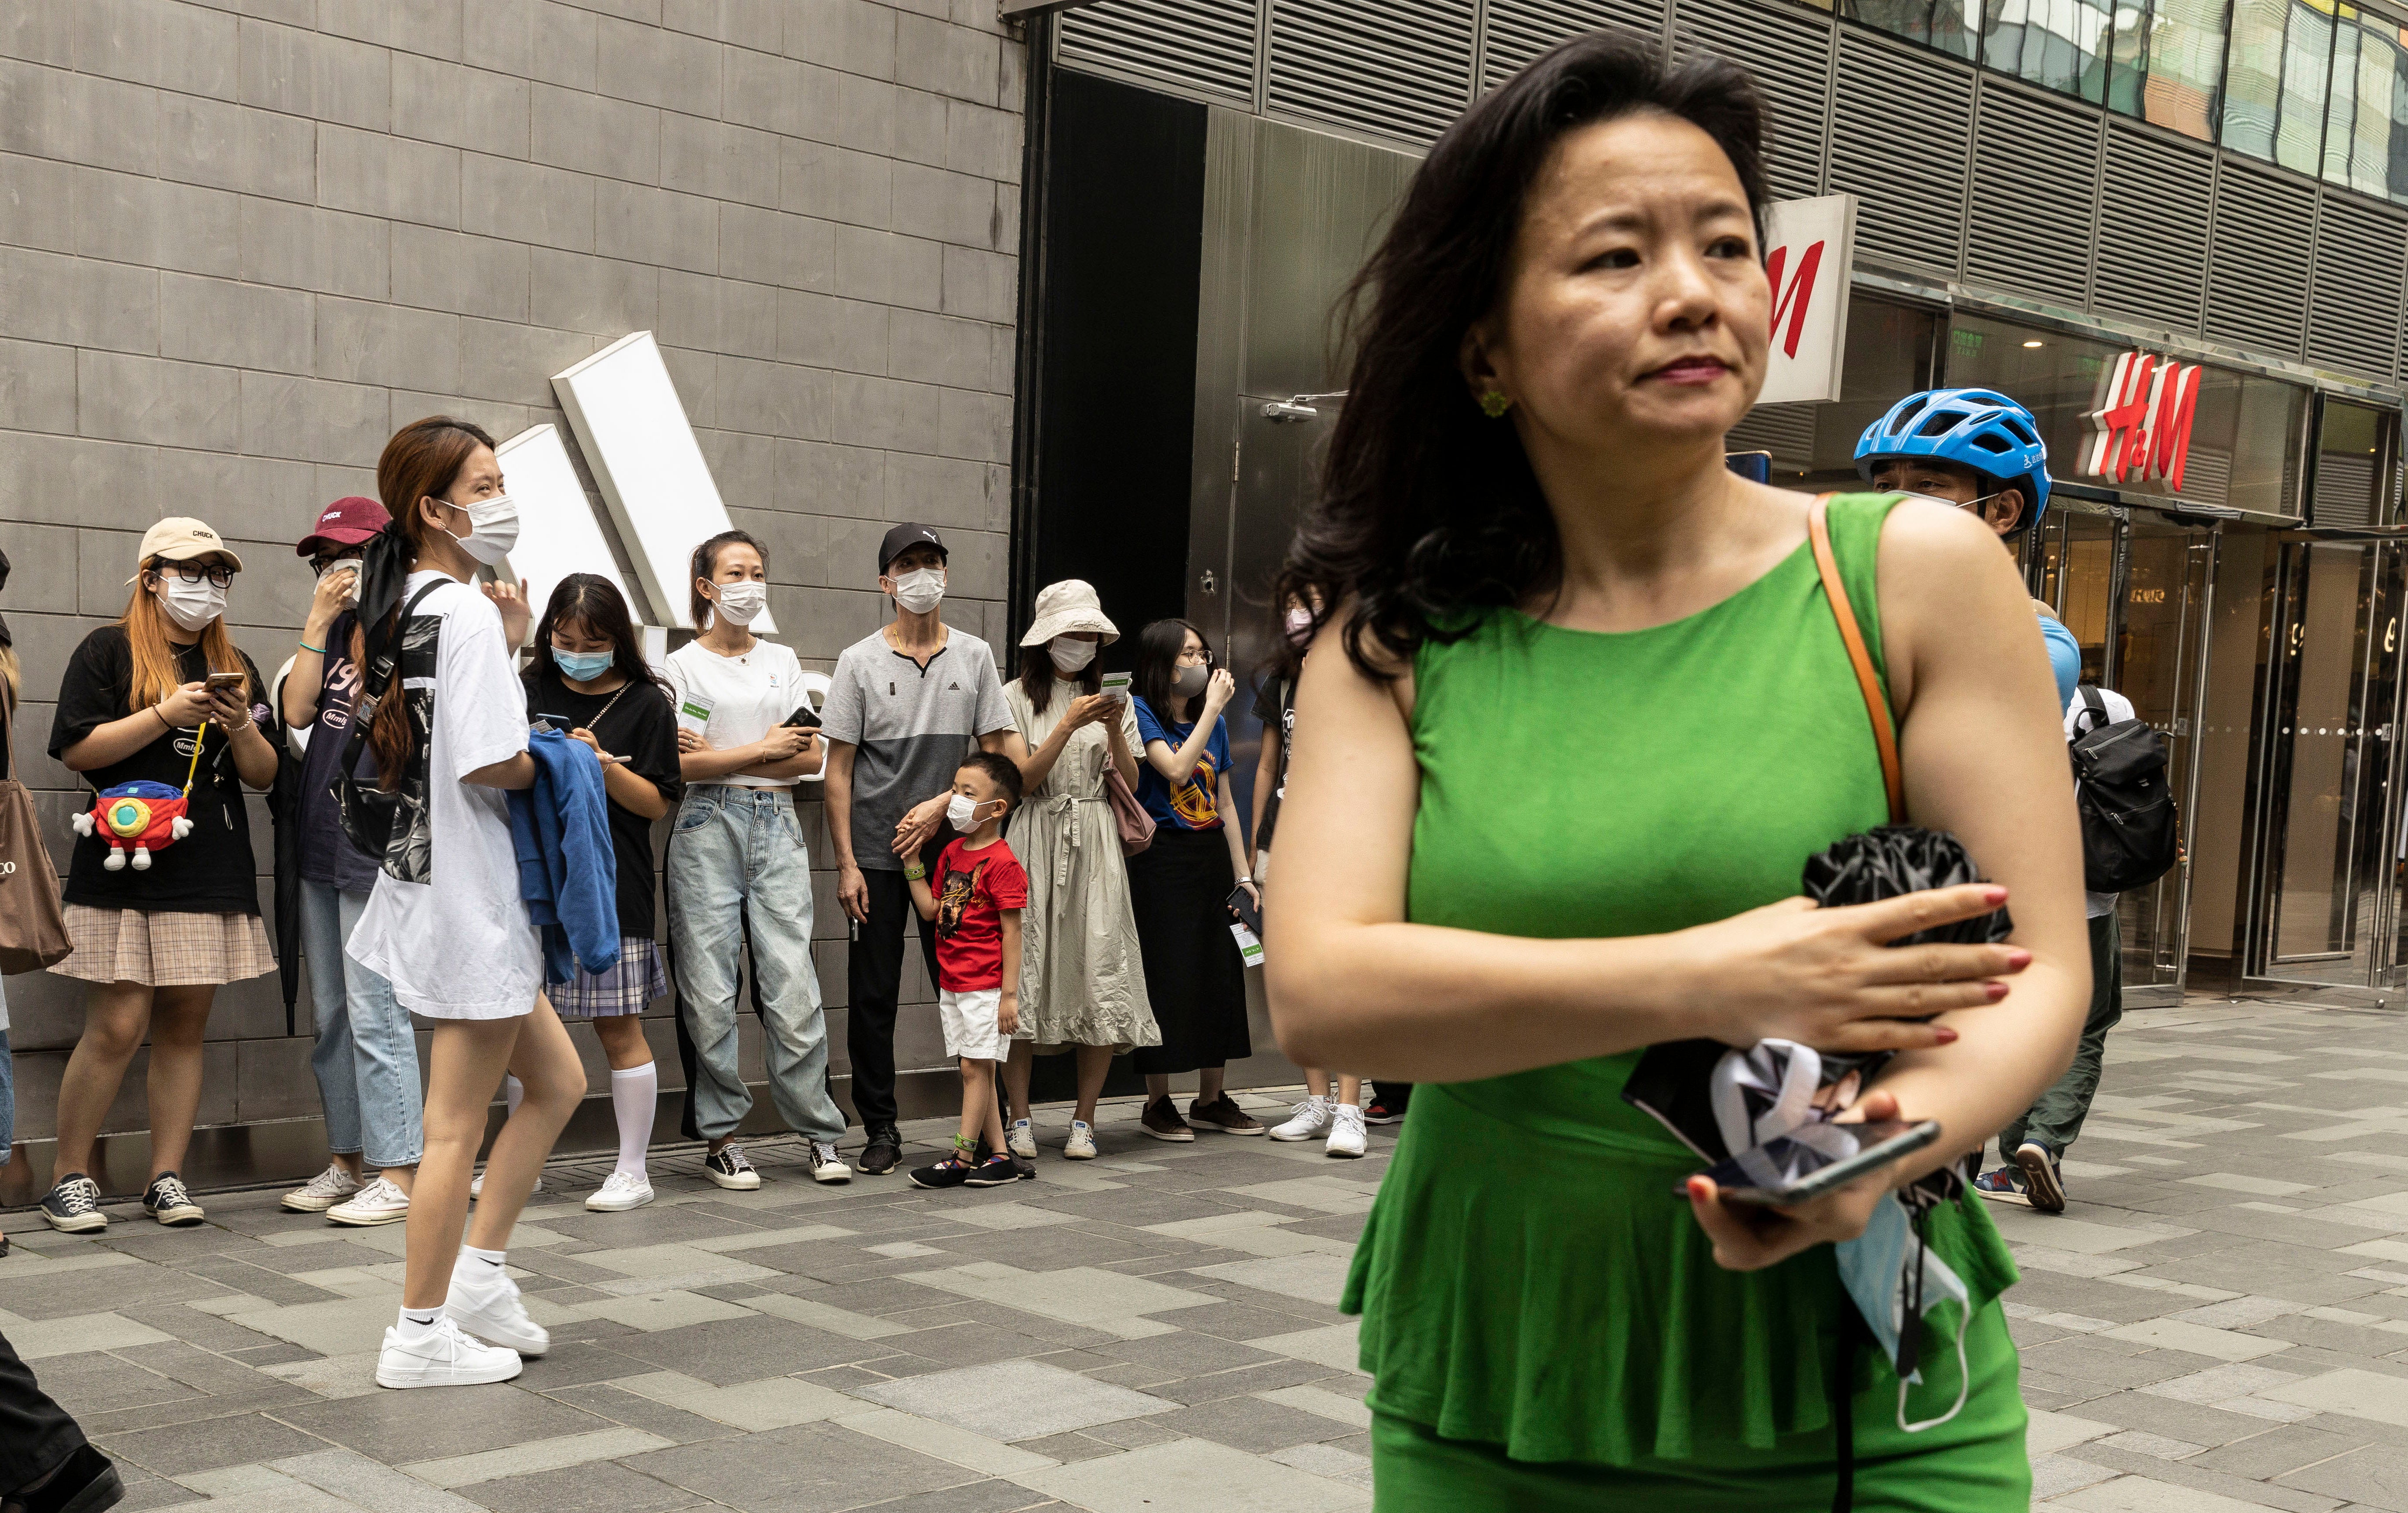 File photo: Details behind journalist Cheng Lei’s detention and trial remain sealed